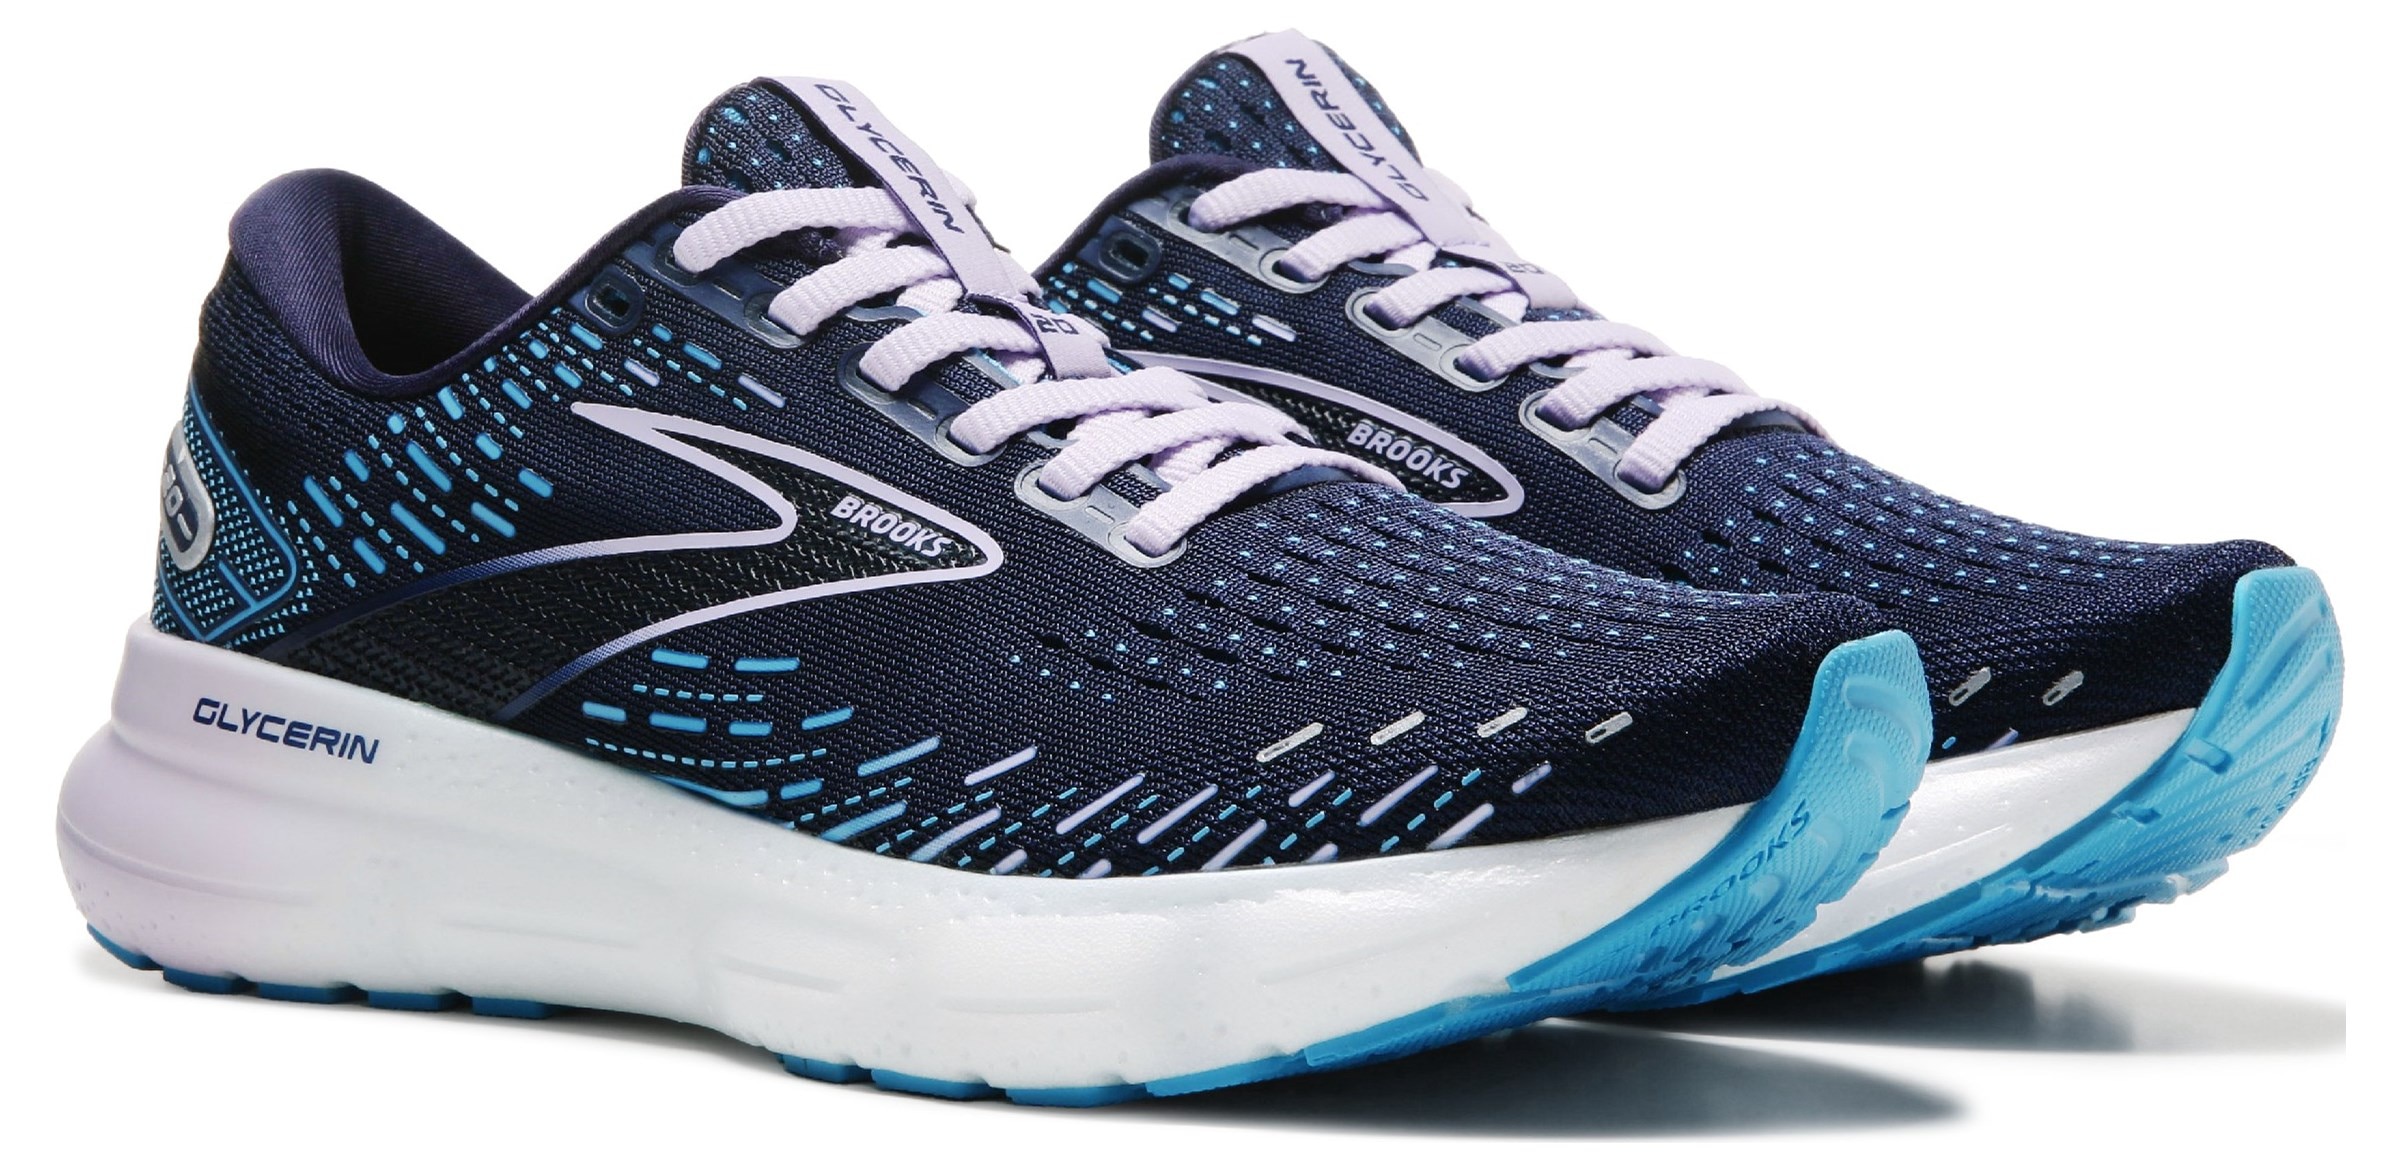 The Brooks Glycerin 19 Running Shoes Are on Sale at